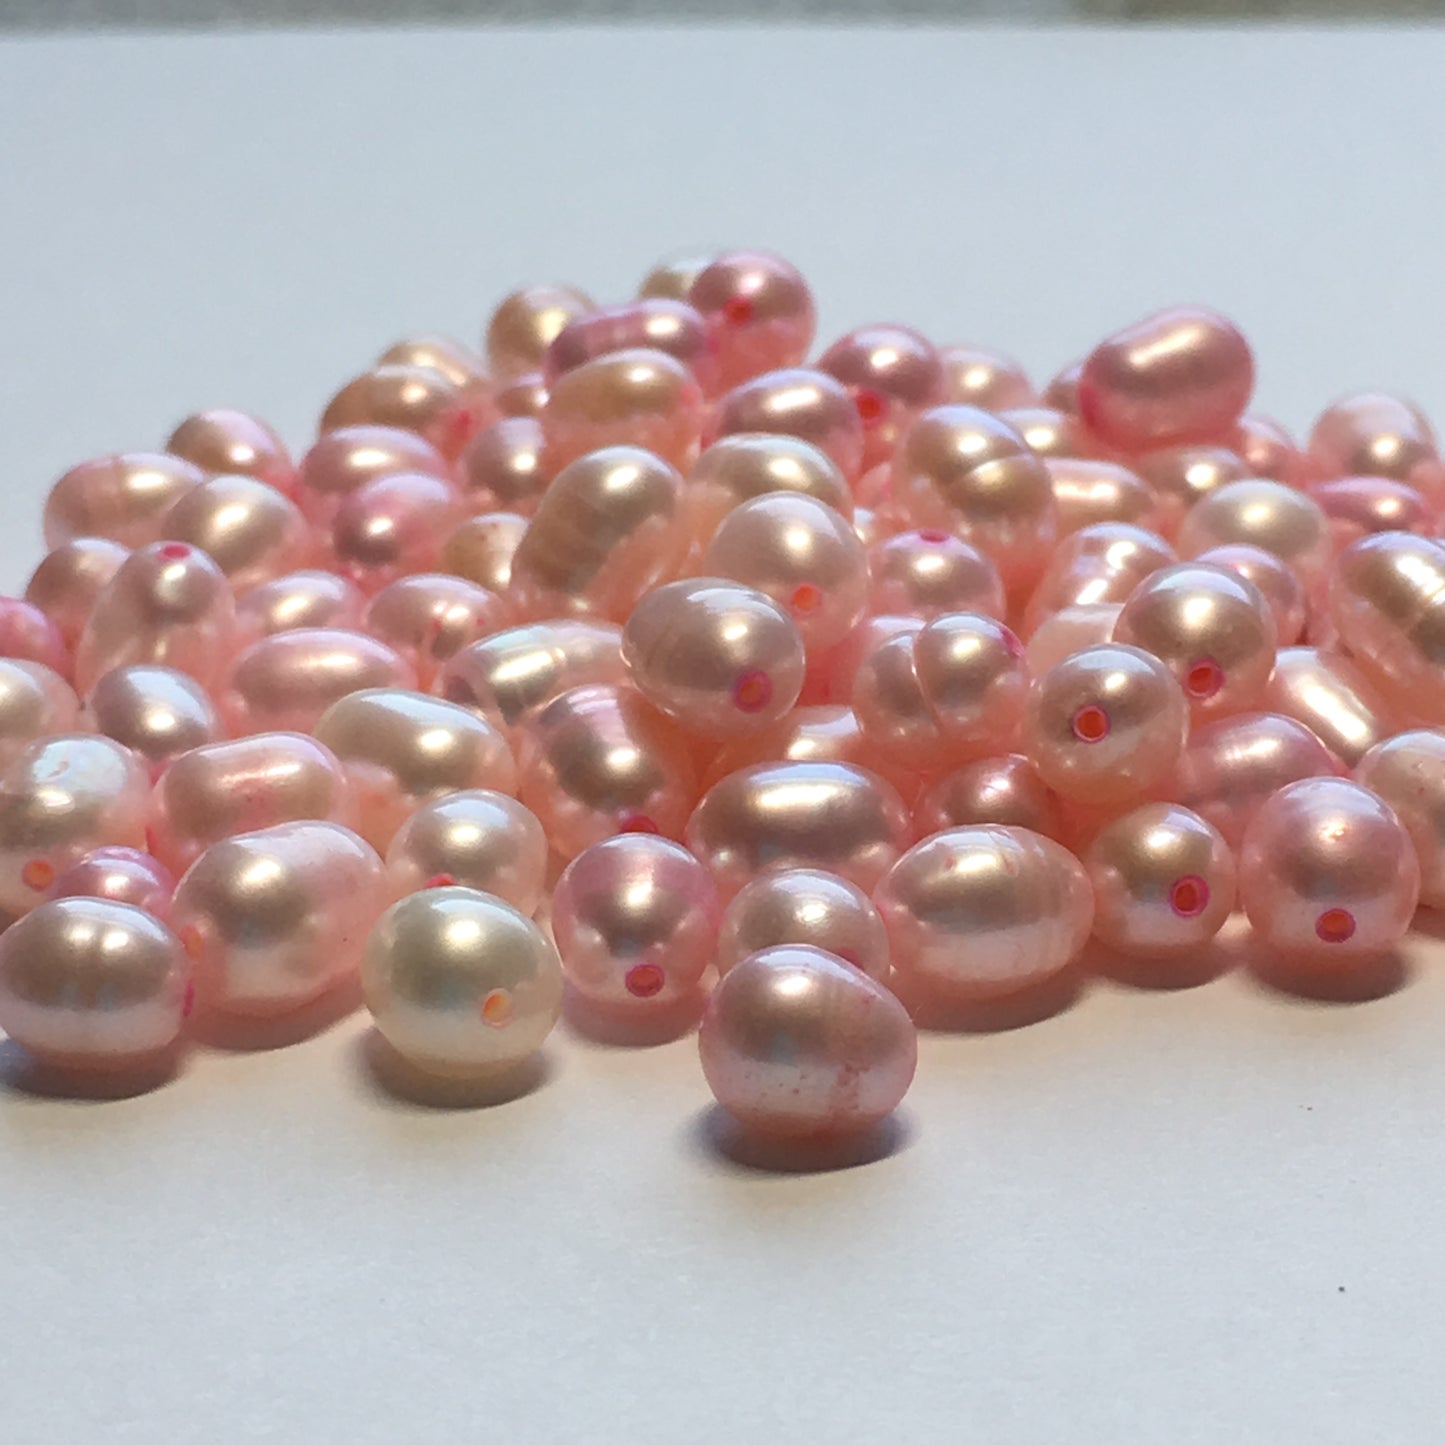 Pink Dyed Freshwater Pearls, 6-8 x 5-6 mm, 100 Pearls